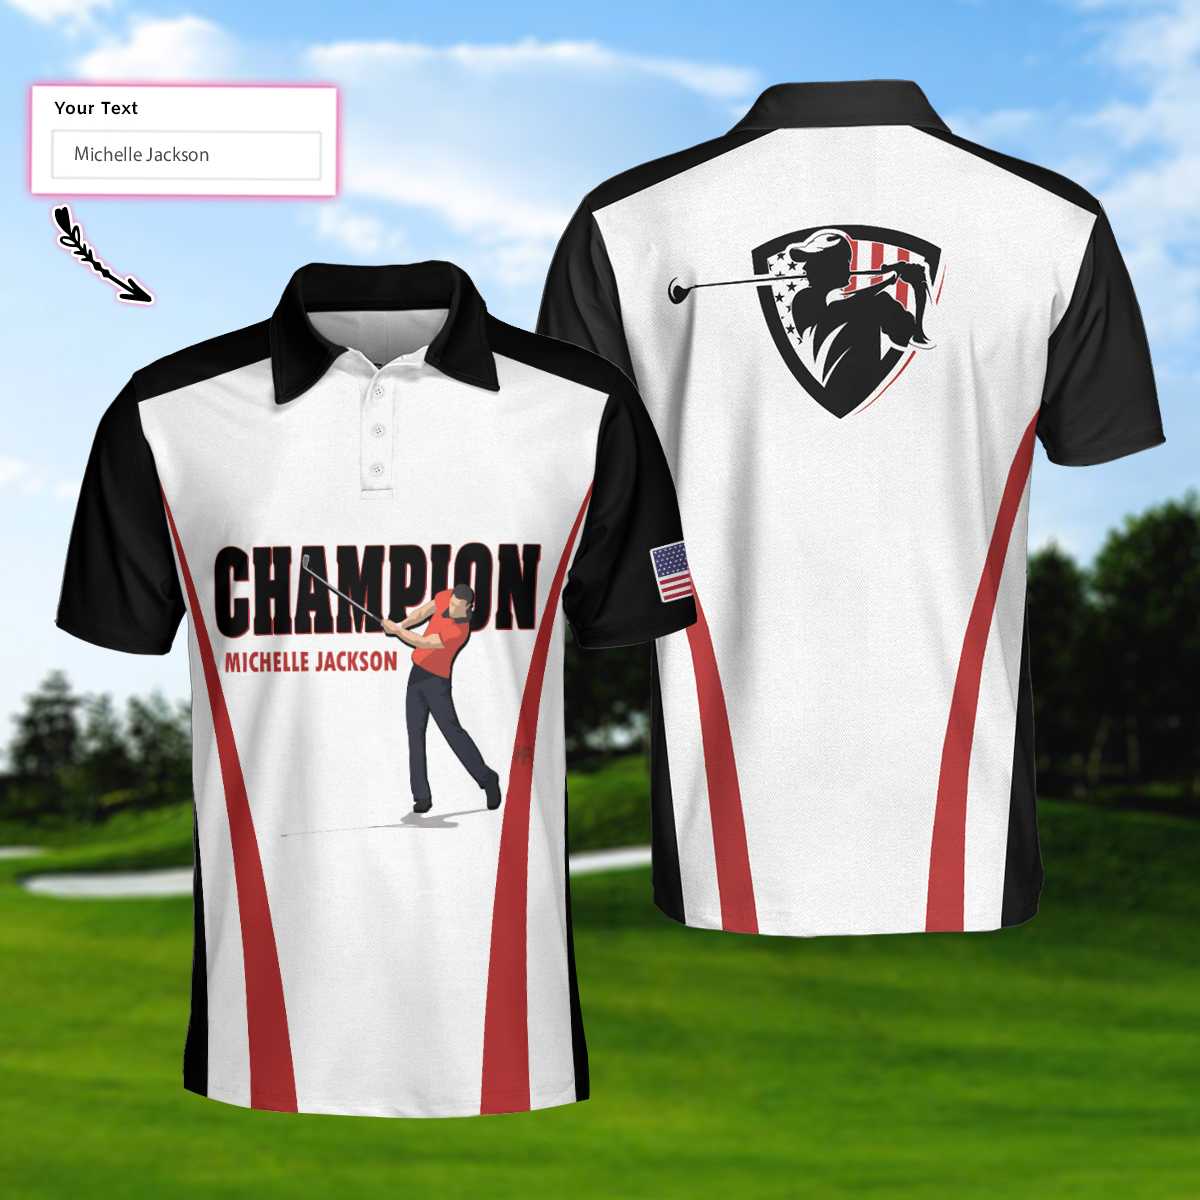 customized champion golfer polo shirt with red and white american flag design the ultimate golf shirt for men gp418 of9fz